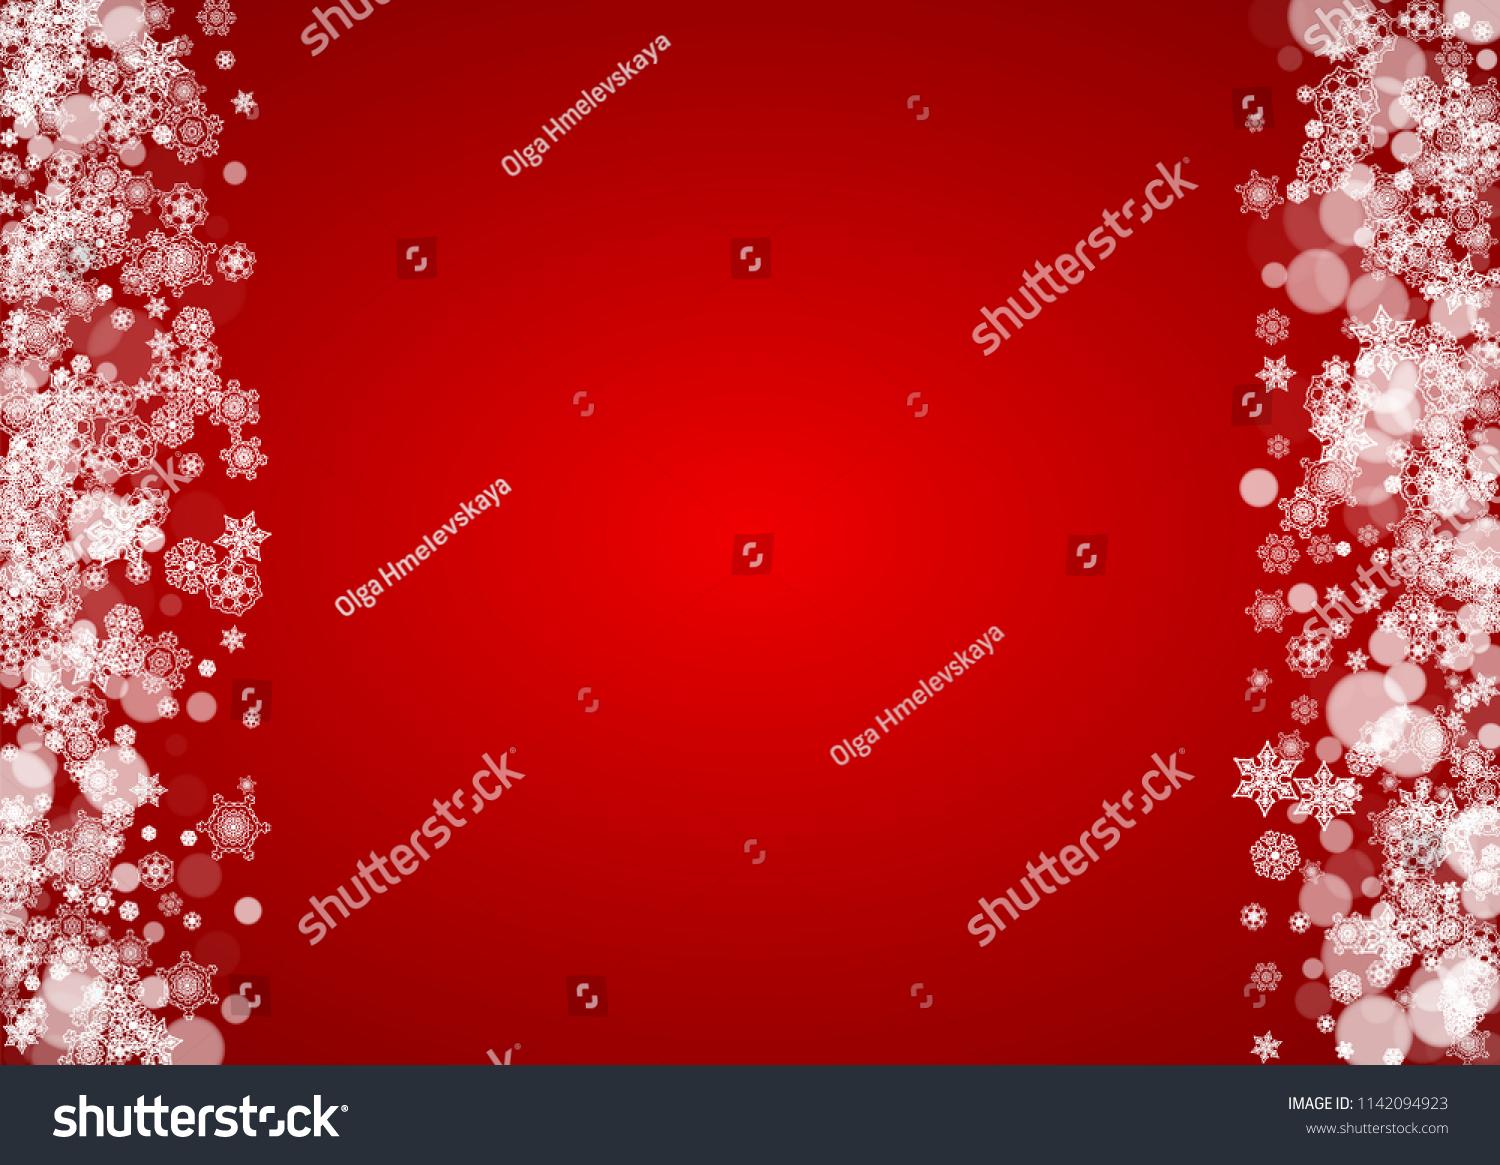 Christmas snowflakes on red background. Santa Claus colors. Horizontal frame for winter banner, gift coupon, voucher, ads, party events with Christmas snowflakes. Falling snow for holiday celebration #1142094923